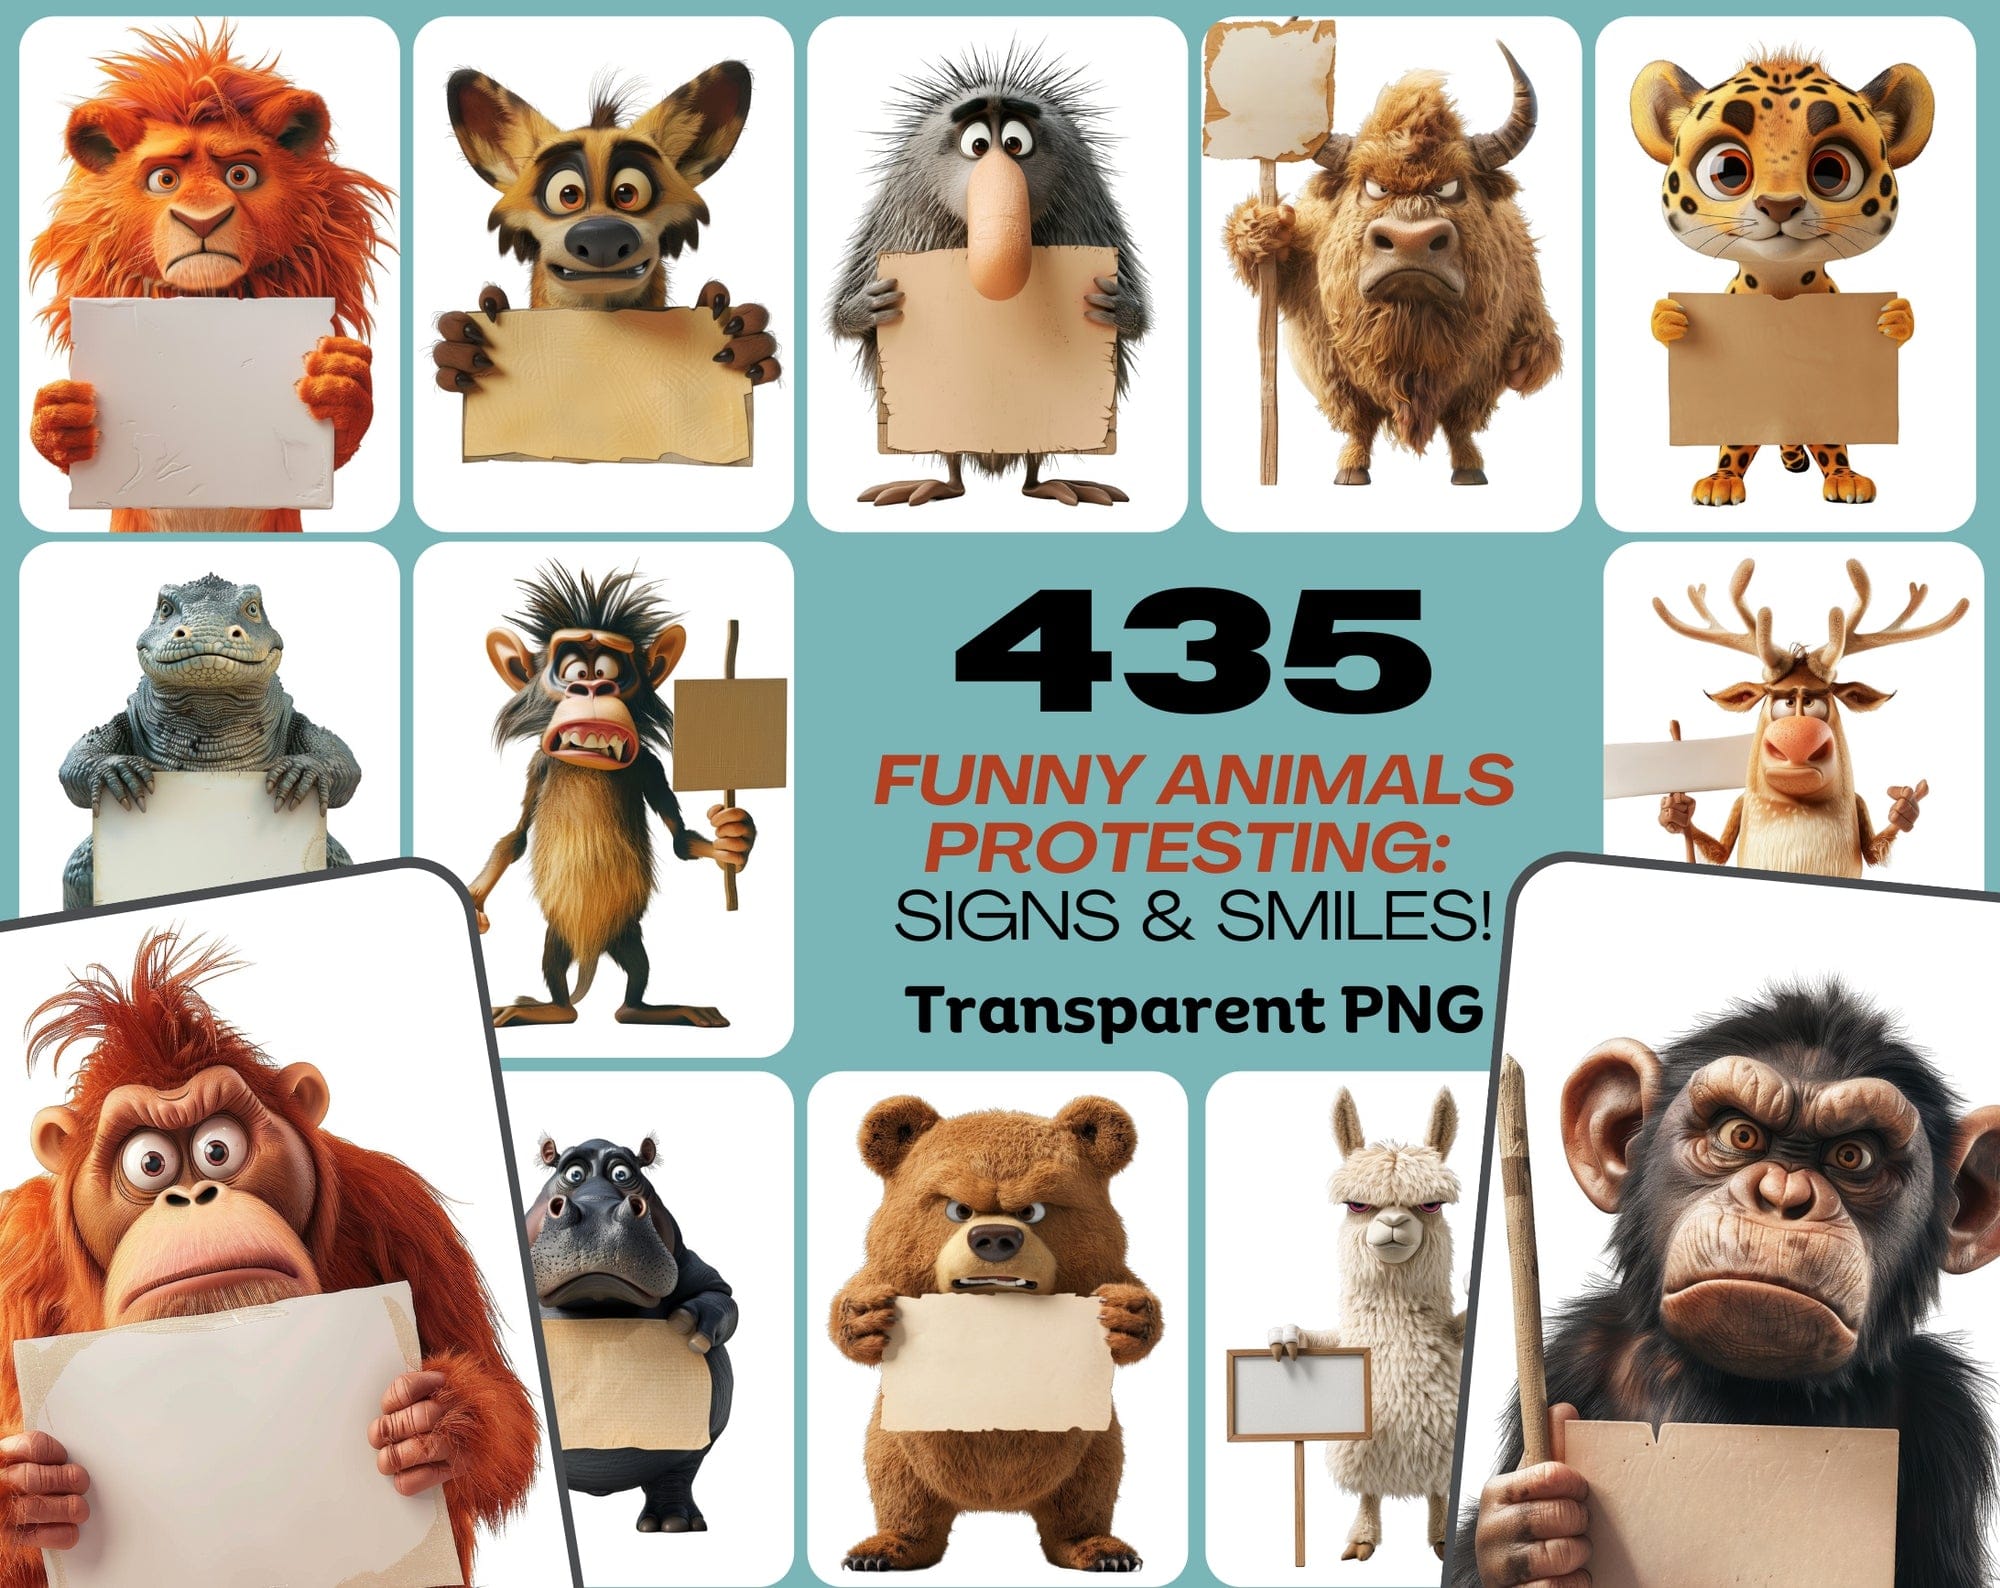 435 Funny Animals Protesting - Unique Designs for Creative Projects - Transparent PNG available Digital Download Sumobundle